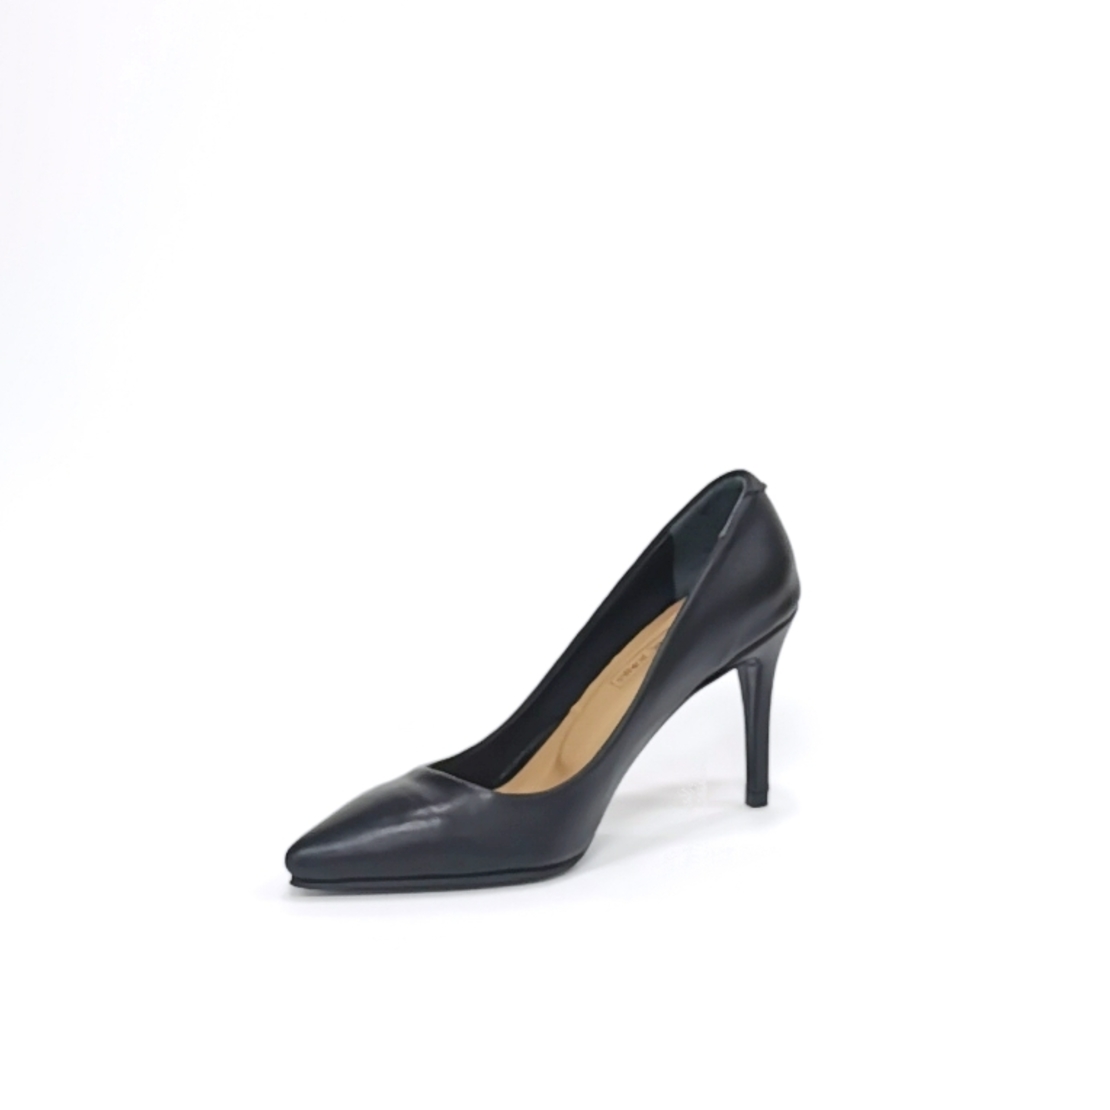 Women's elegant shoes made of natural leather in black/78501